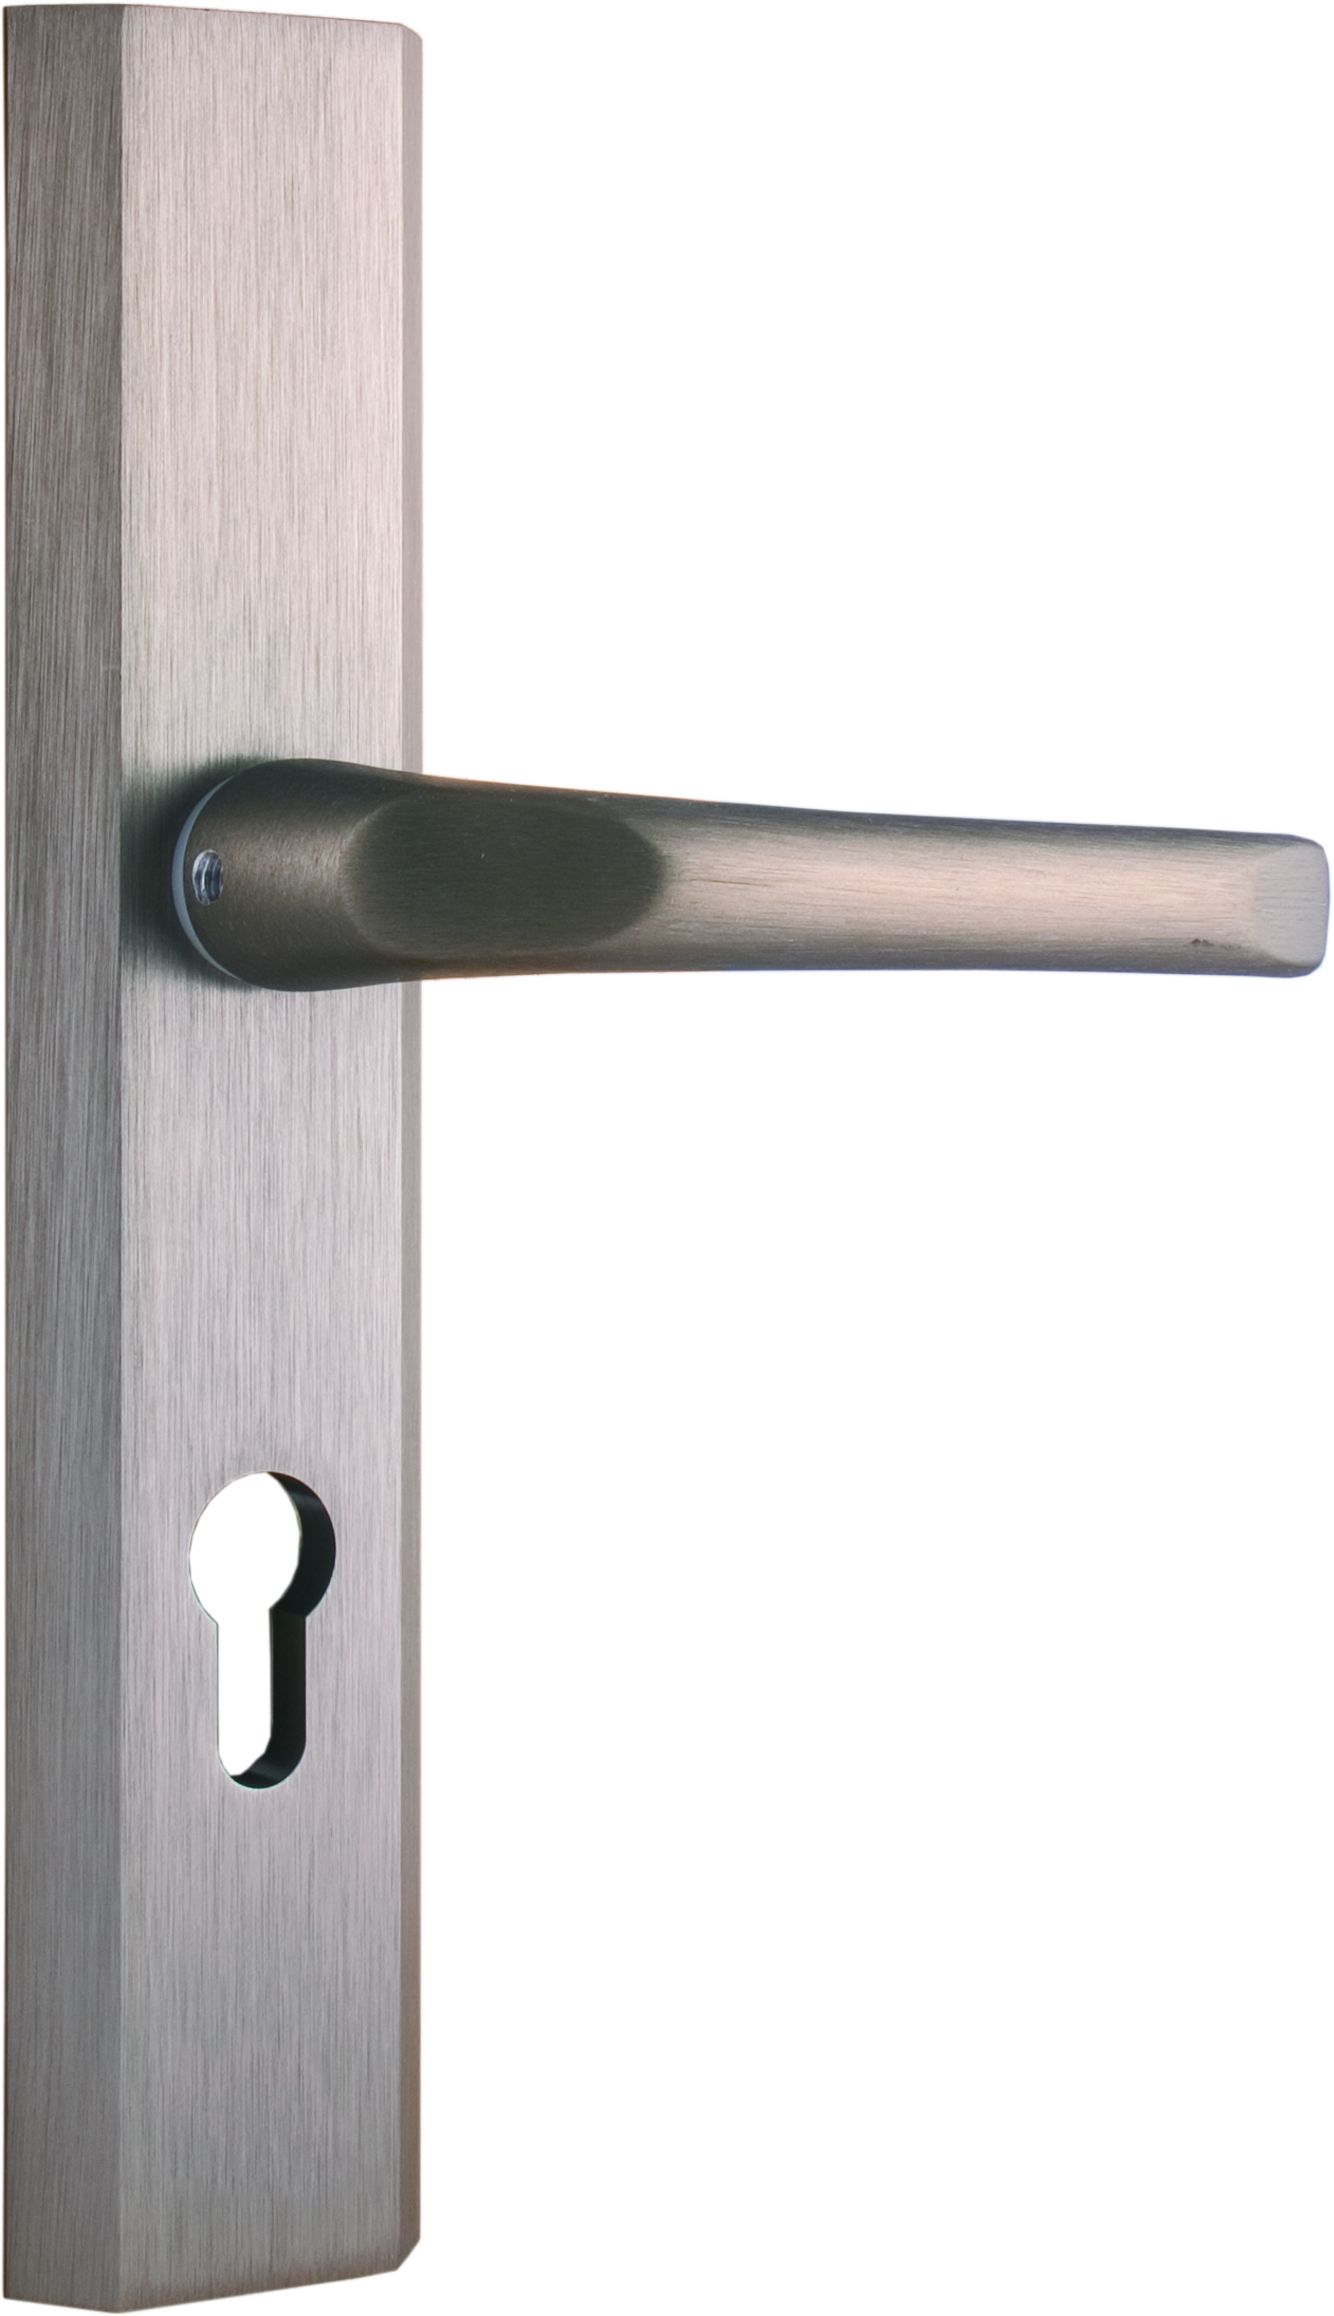 OPAL titan with lever handle